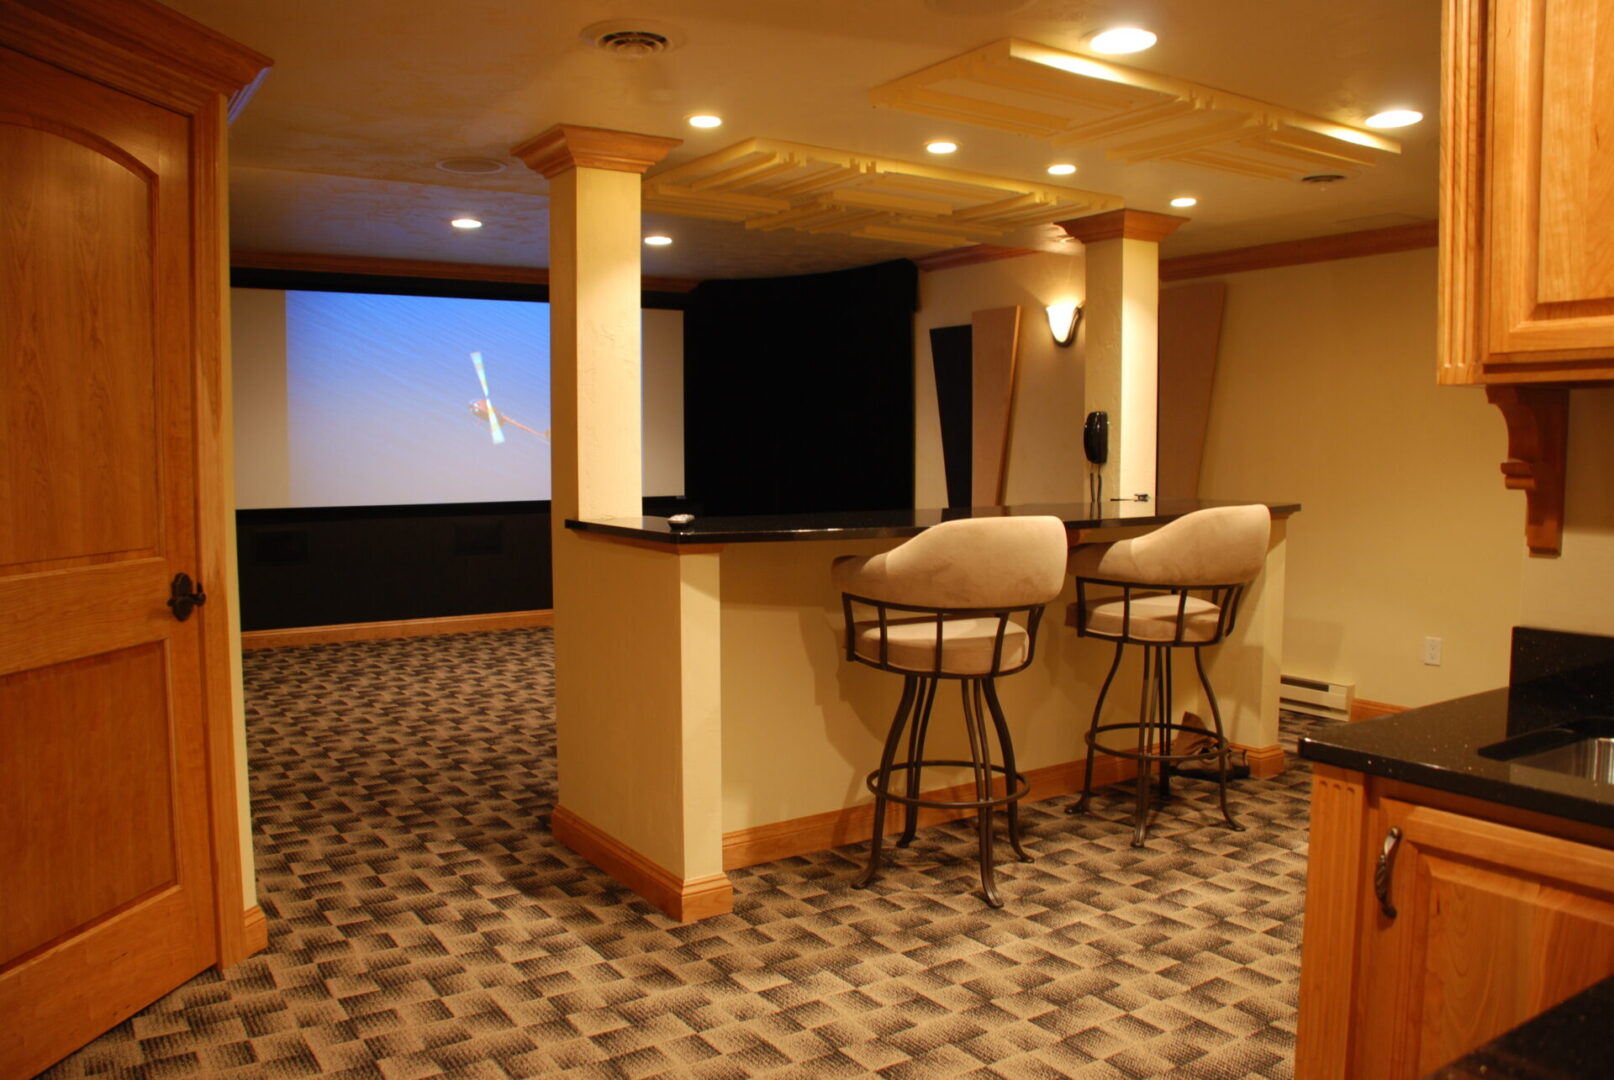 View of a home theater from its kitchen area